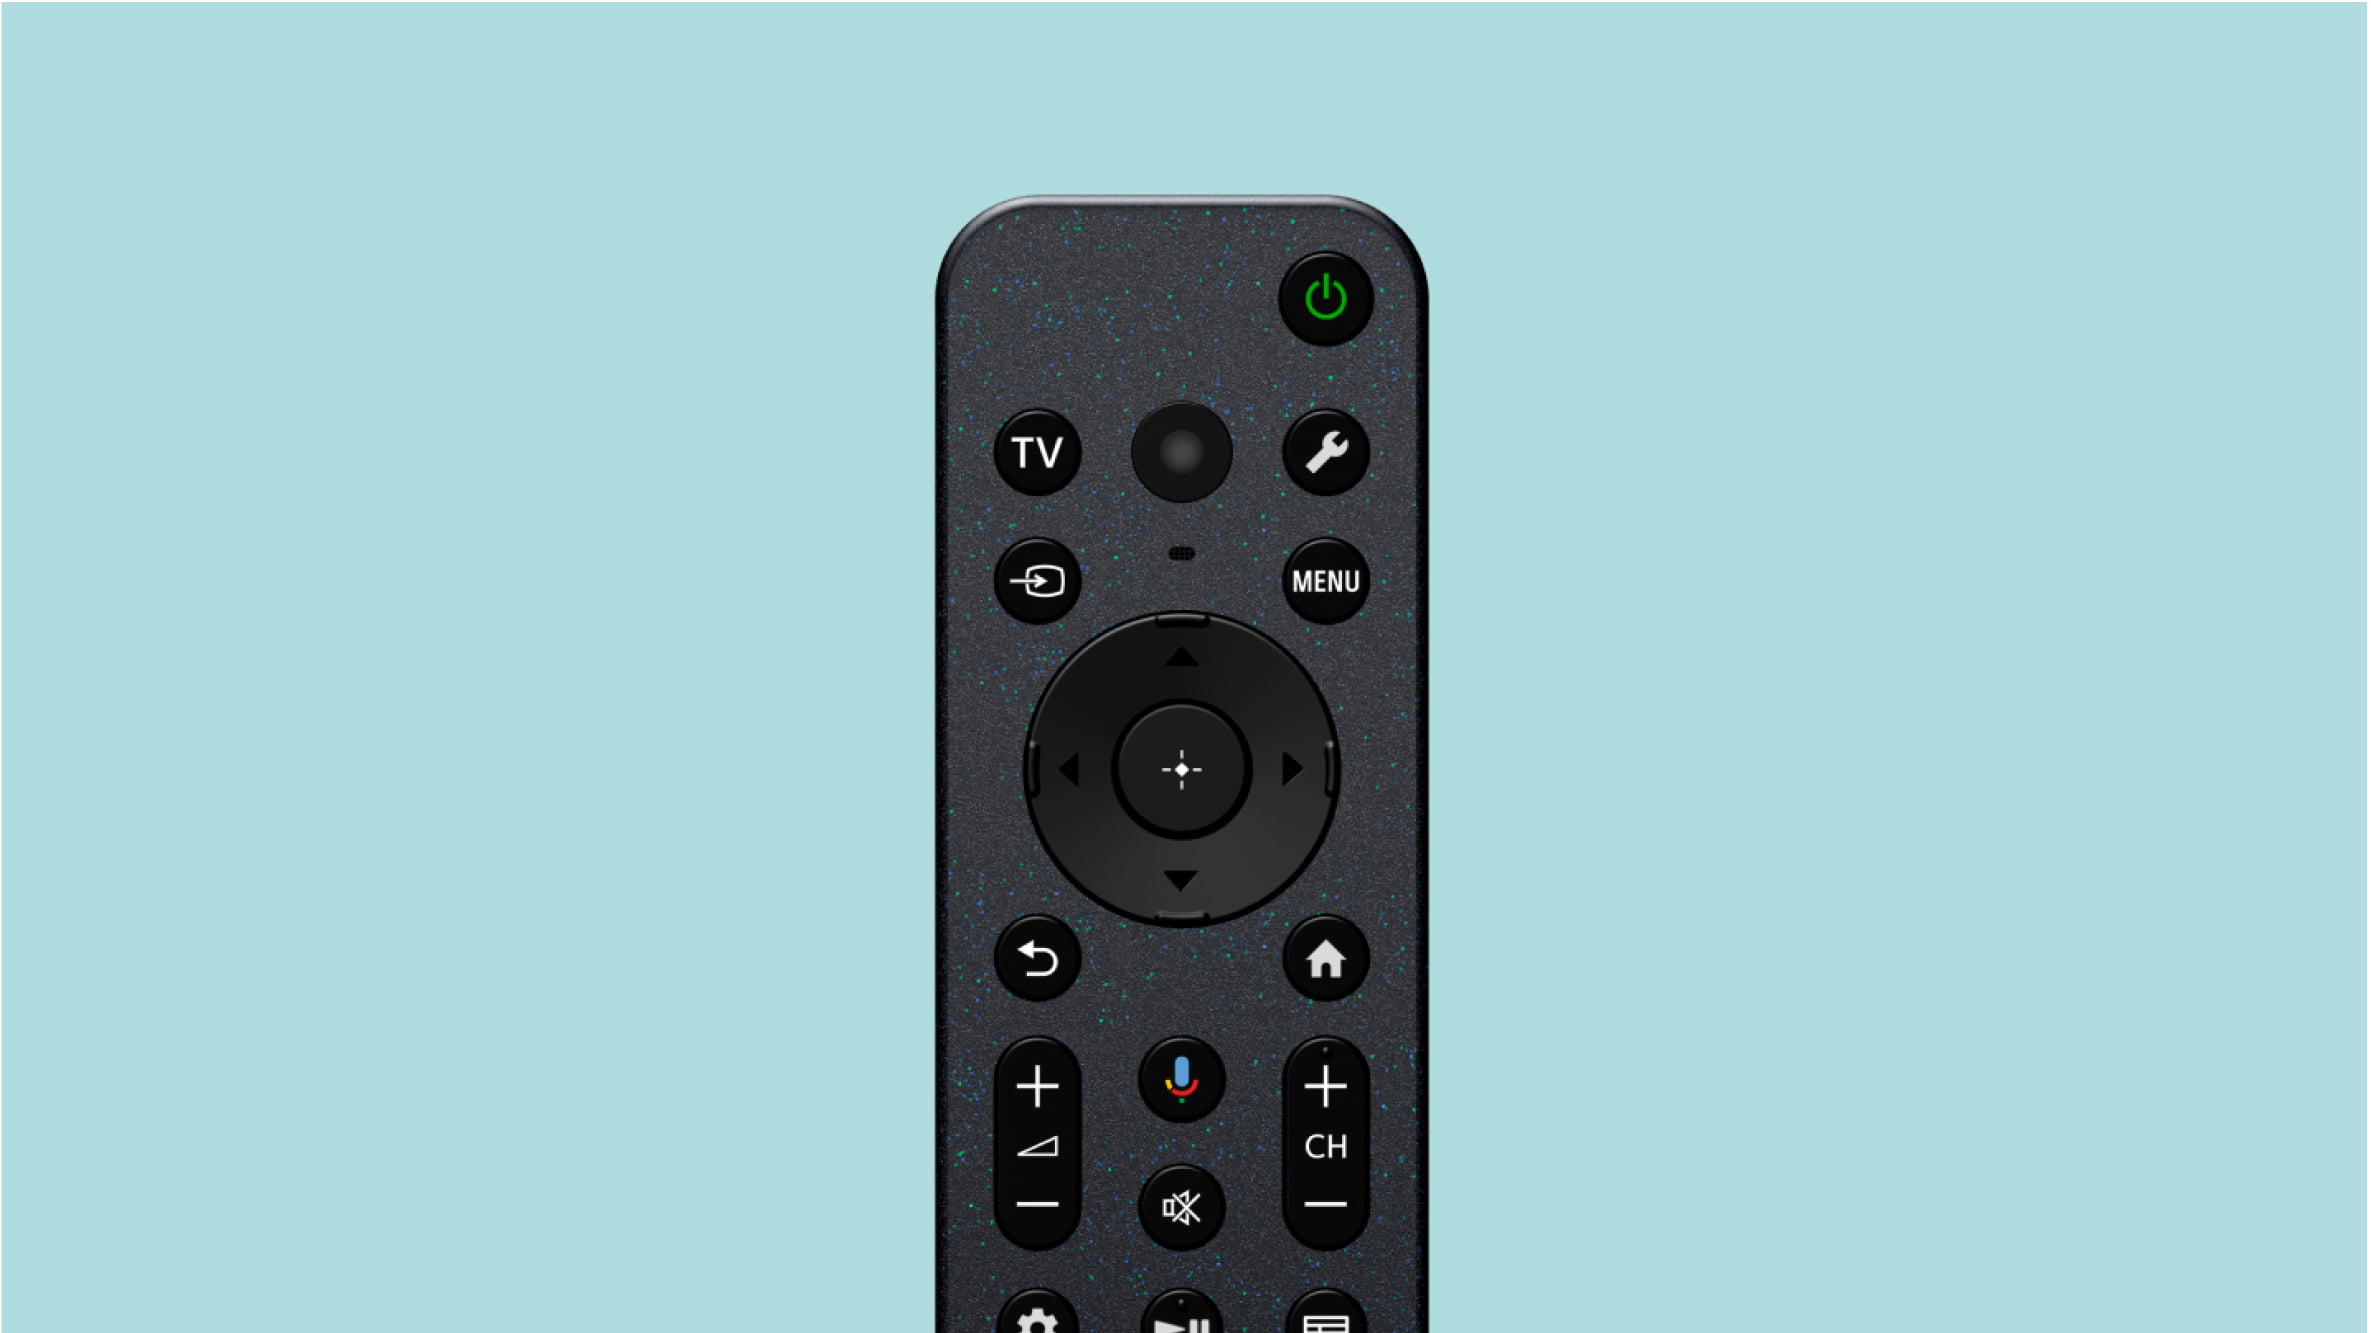 BRAVIA3 Eco Remote. Easy to clean and use.